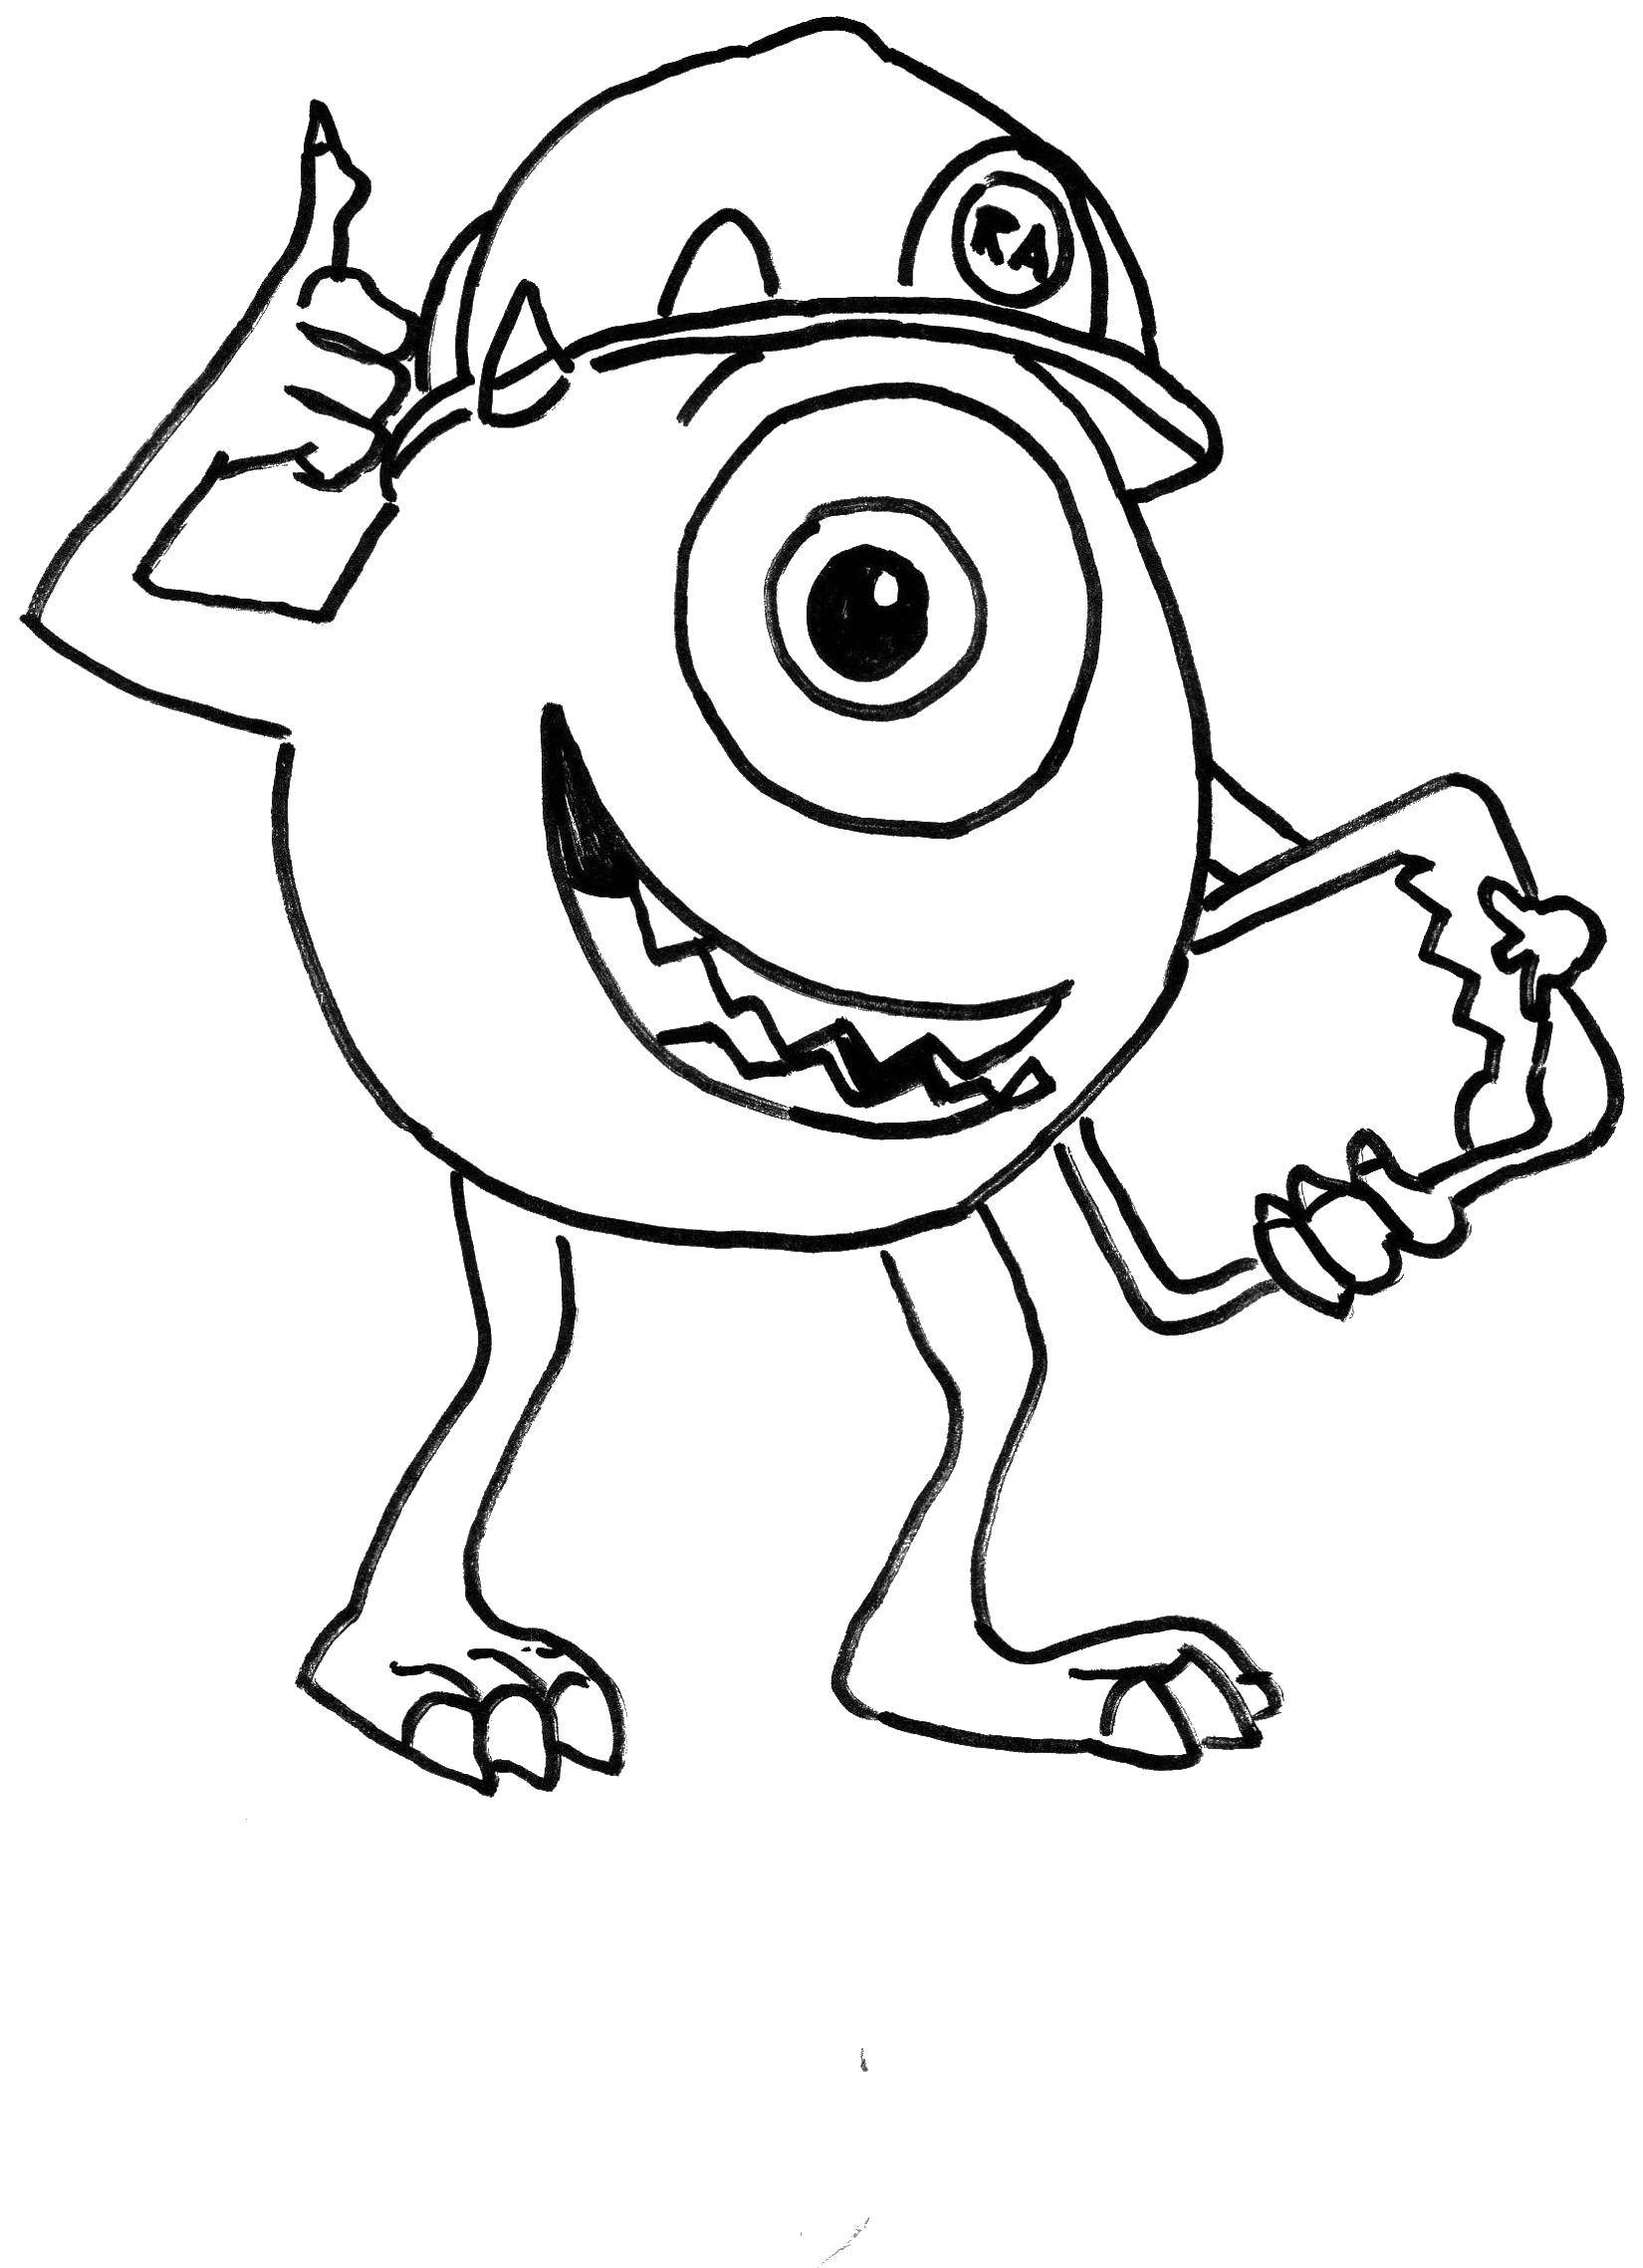 Coloring Corporation of monsters.. Category cartoons. Tags:  monsters Inc, monster cartoons.